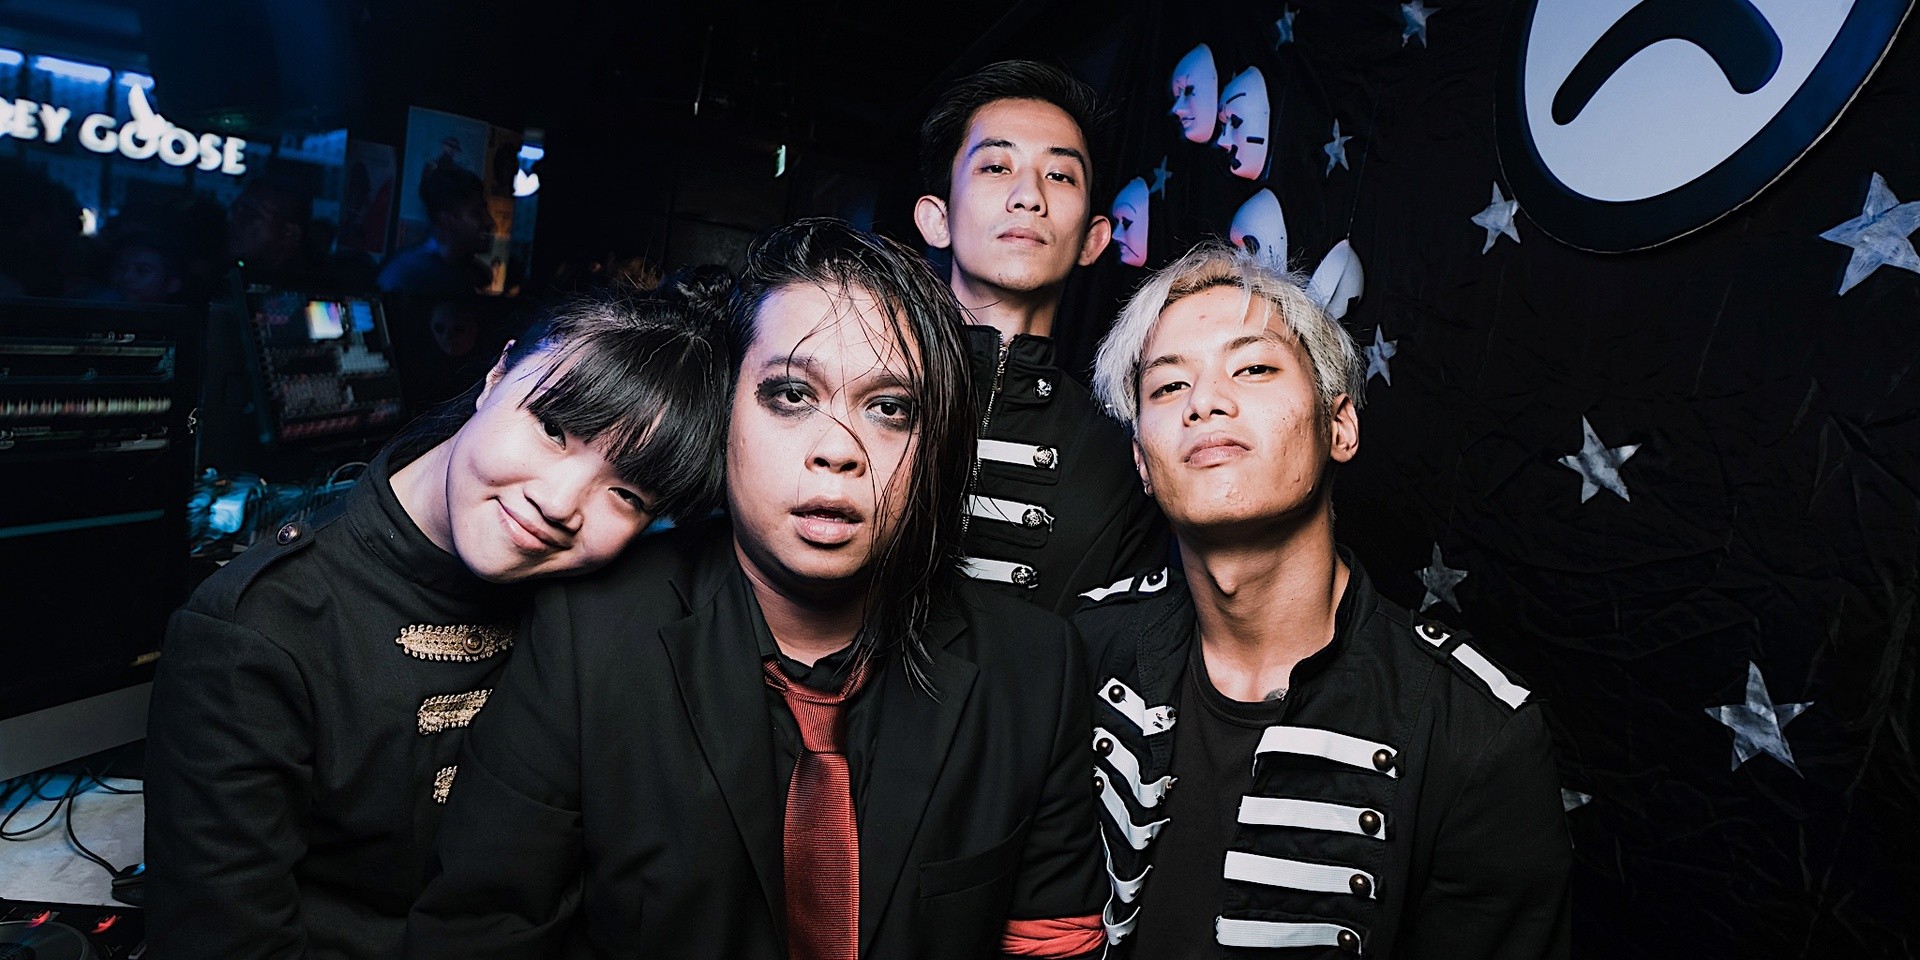 Meet the crew behind EMONIGHTSG, who are bringing emo music to clubs in Singapore